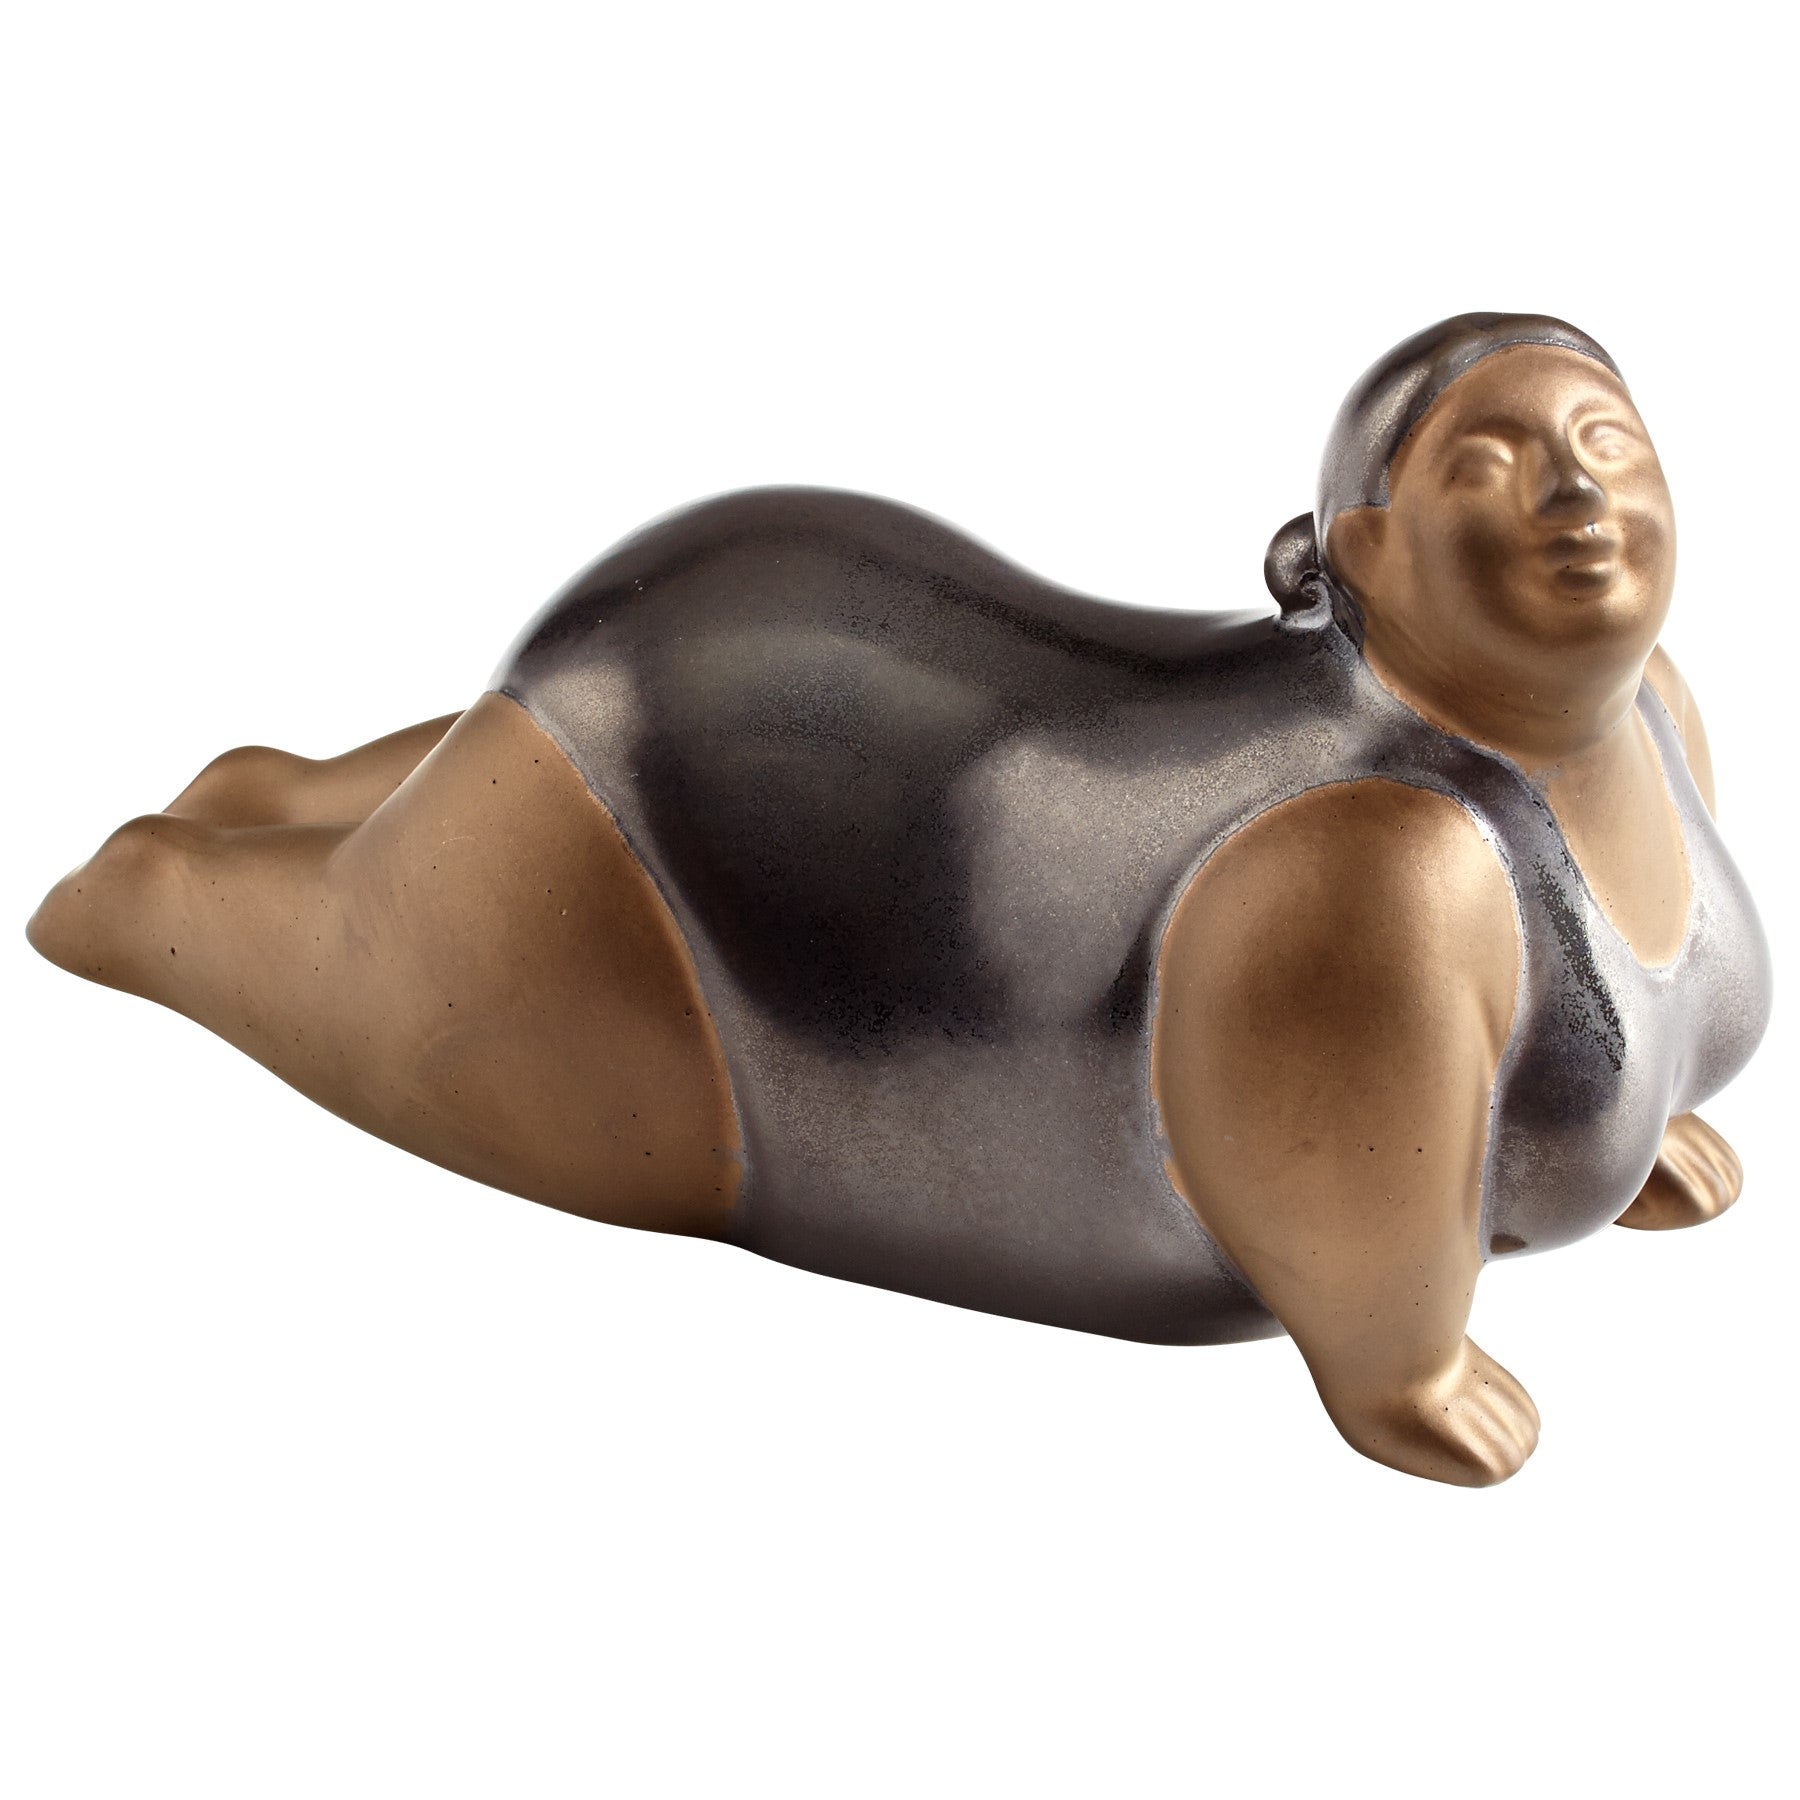 Plus size woman doing yoga. Cobra Pose. Painted ceramic looks like bronze. Felt feet to protect your furniture. Approximate size: 7.25 x 2.75 x 3.75 inches